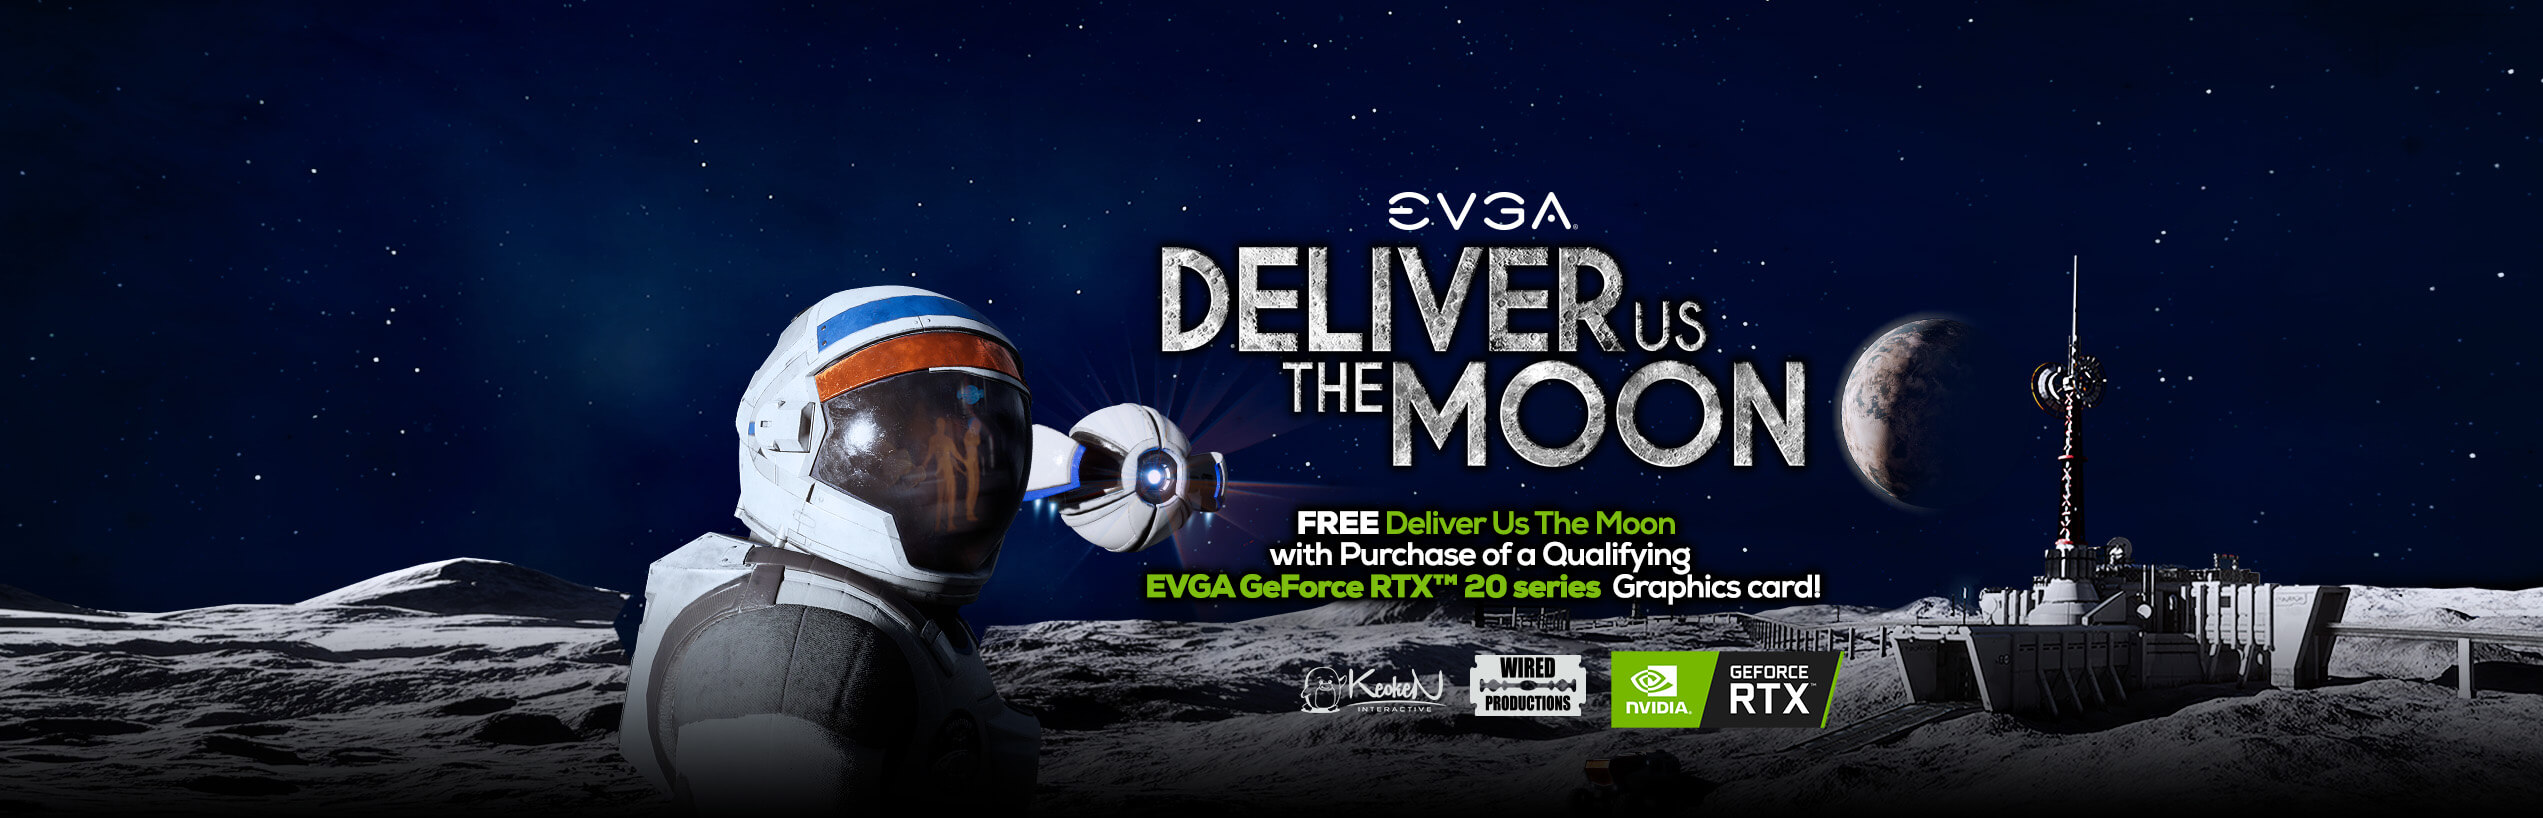 EVGA and Deliver Us The Moon Promo